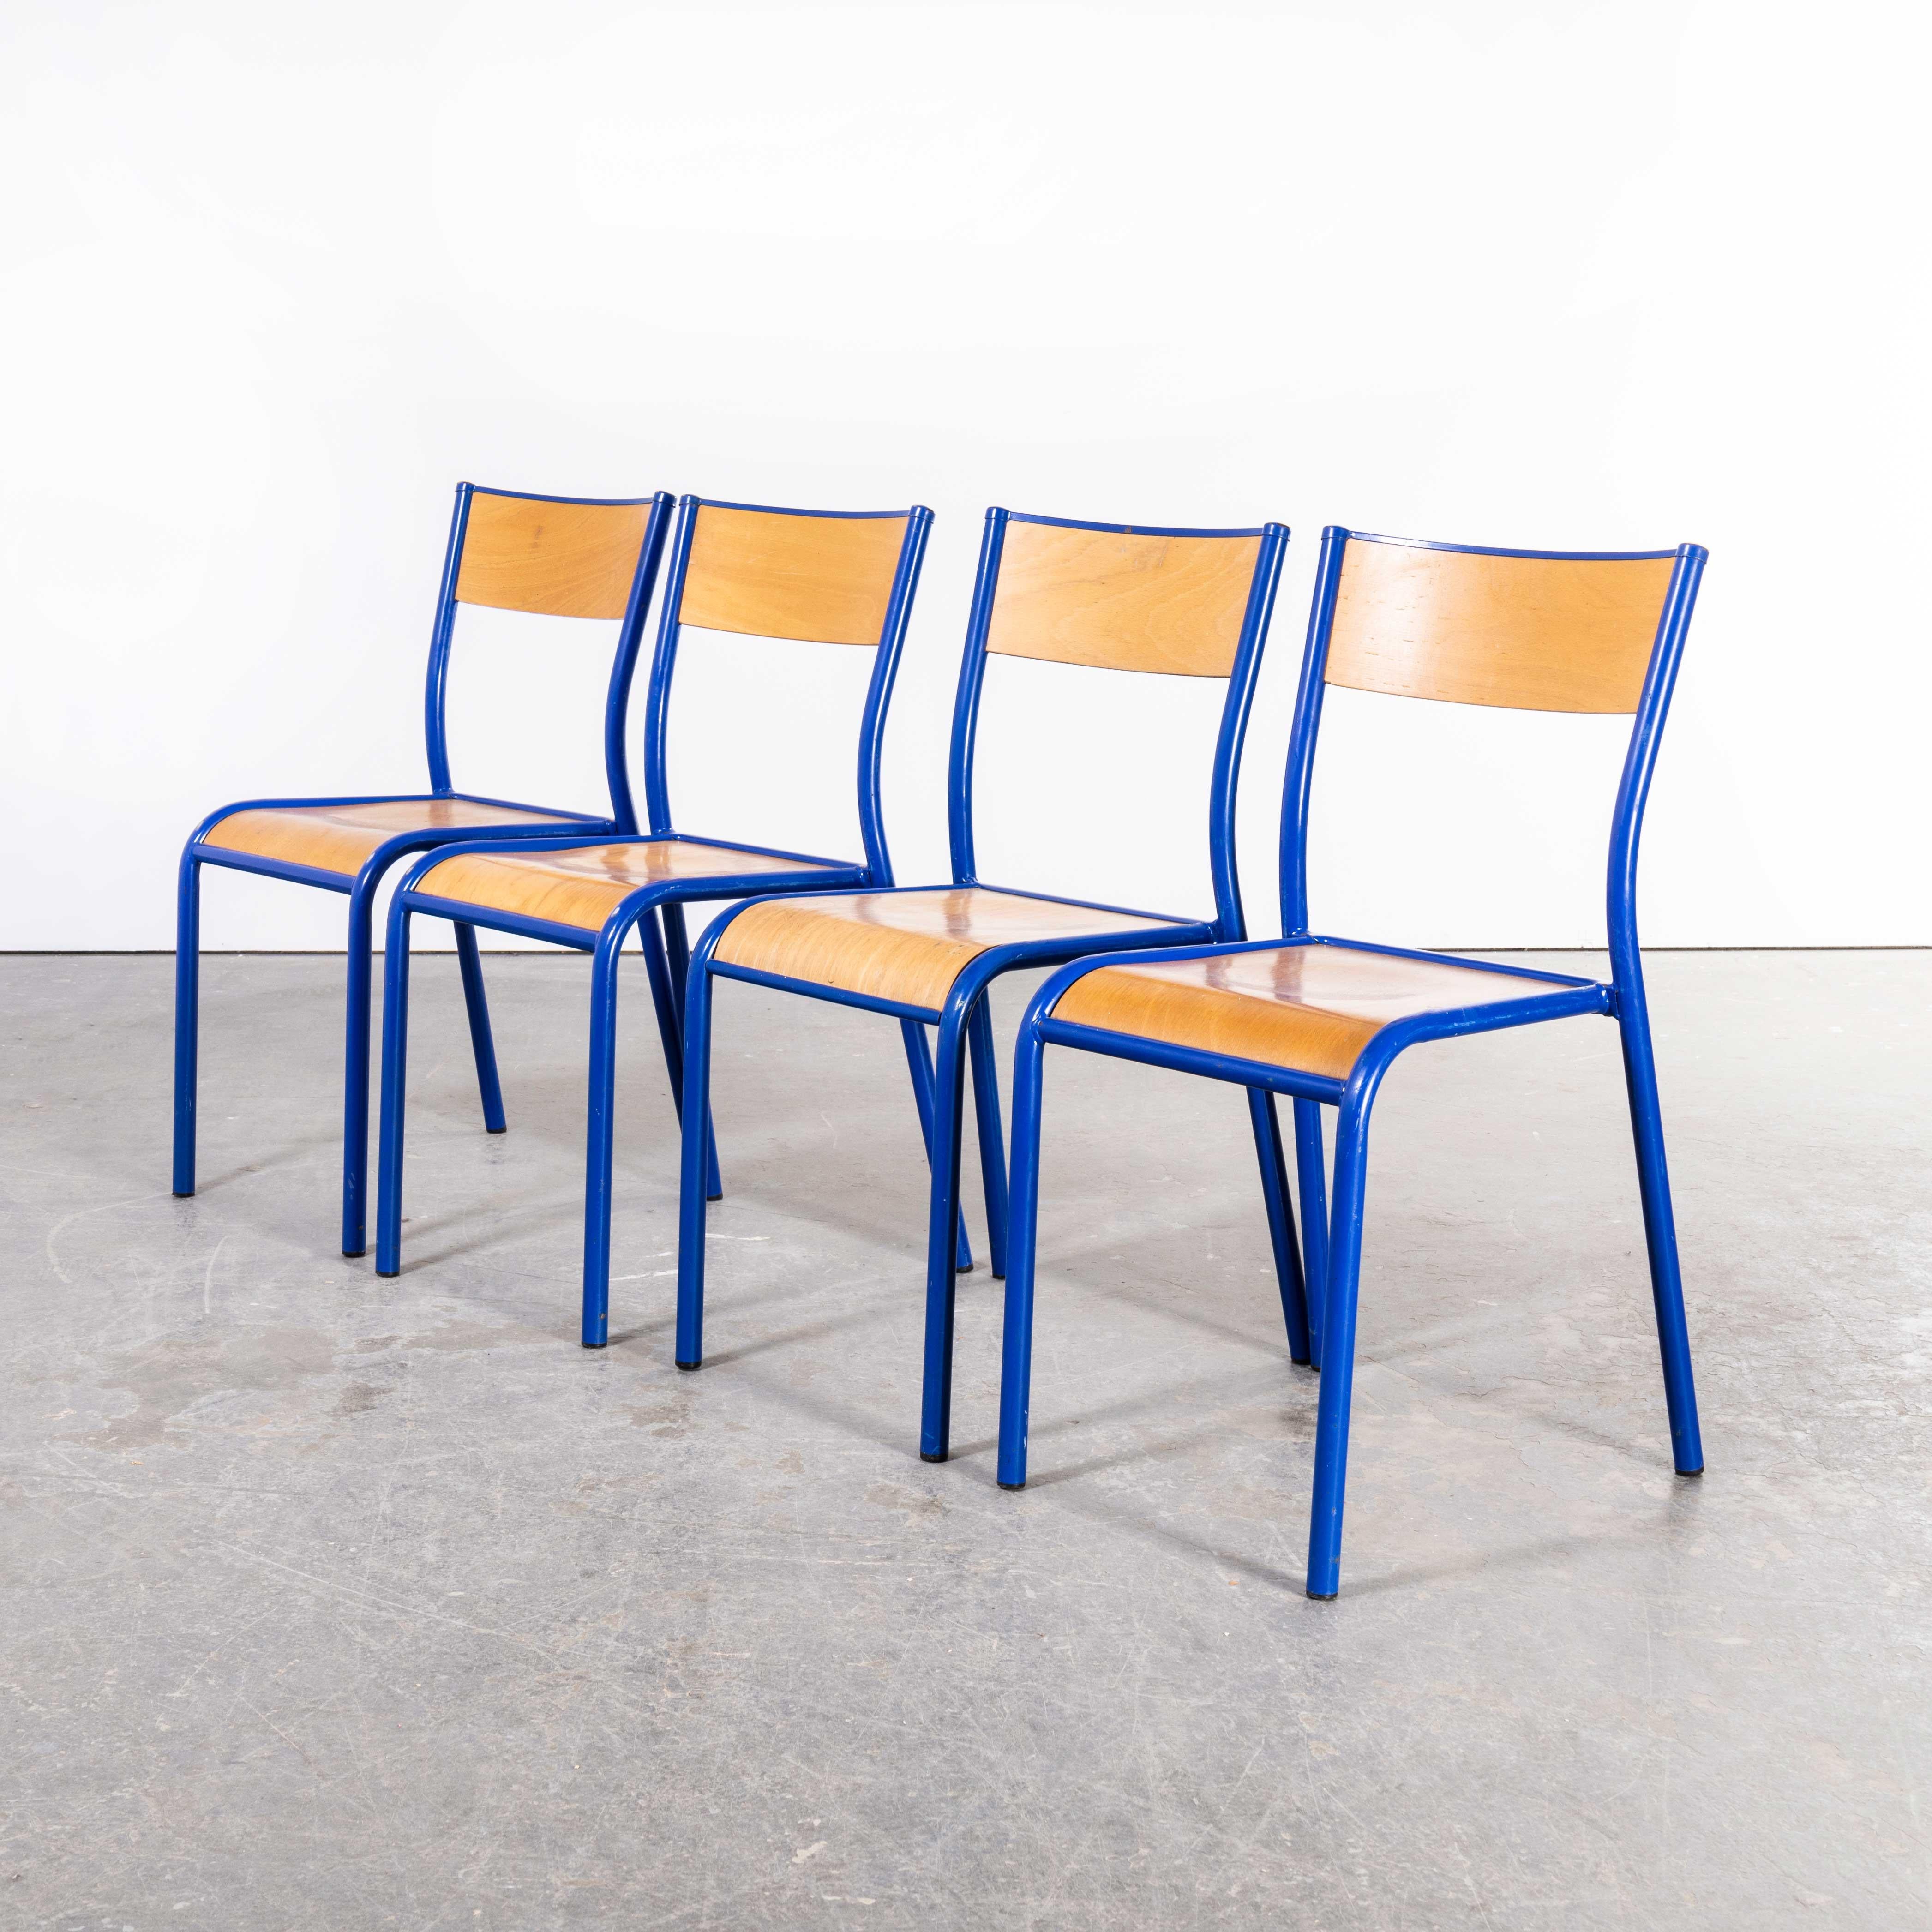 1970s Bright Blue Mullca Stacking Dining Chair, Beech Seat, Set of Four For Sale 1